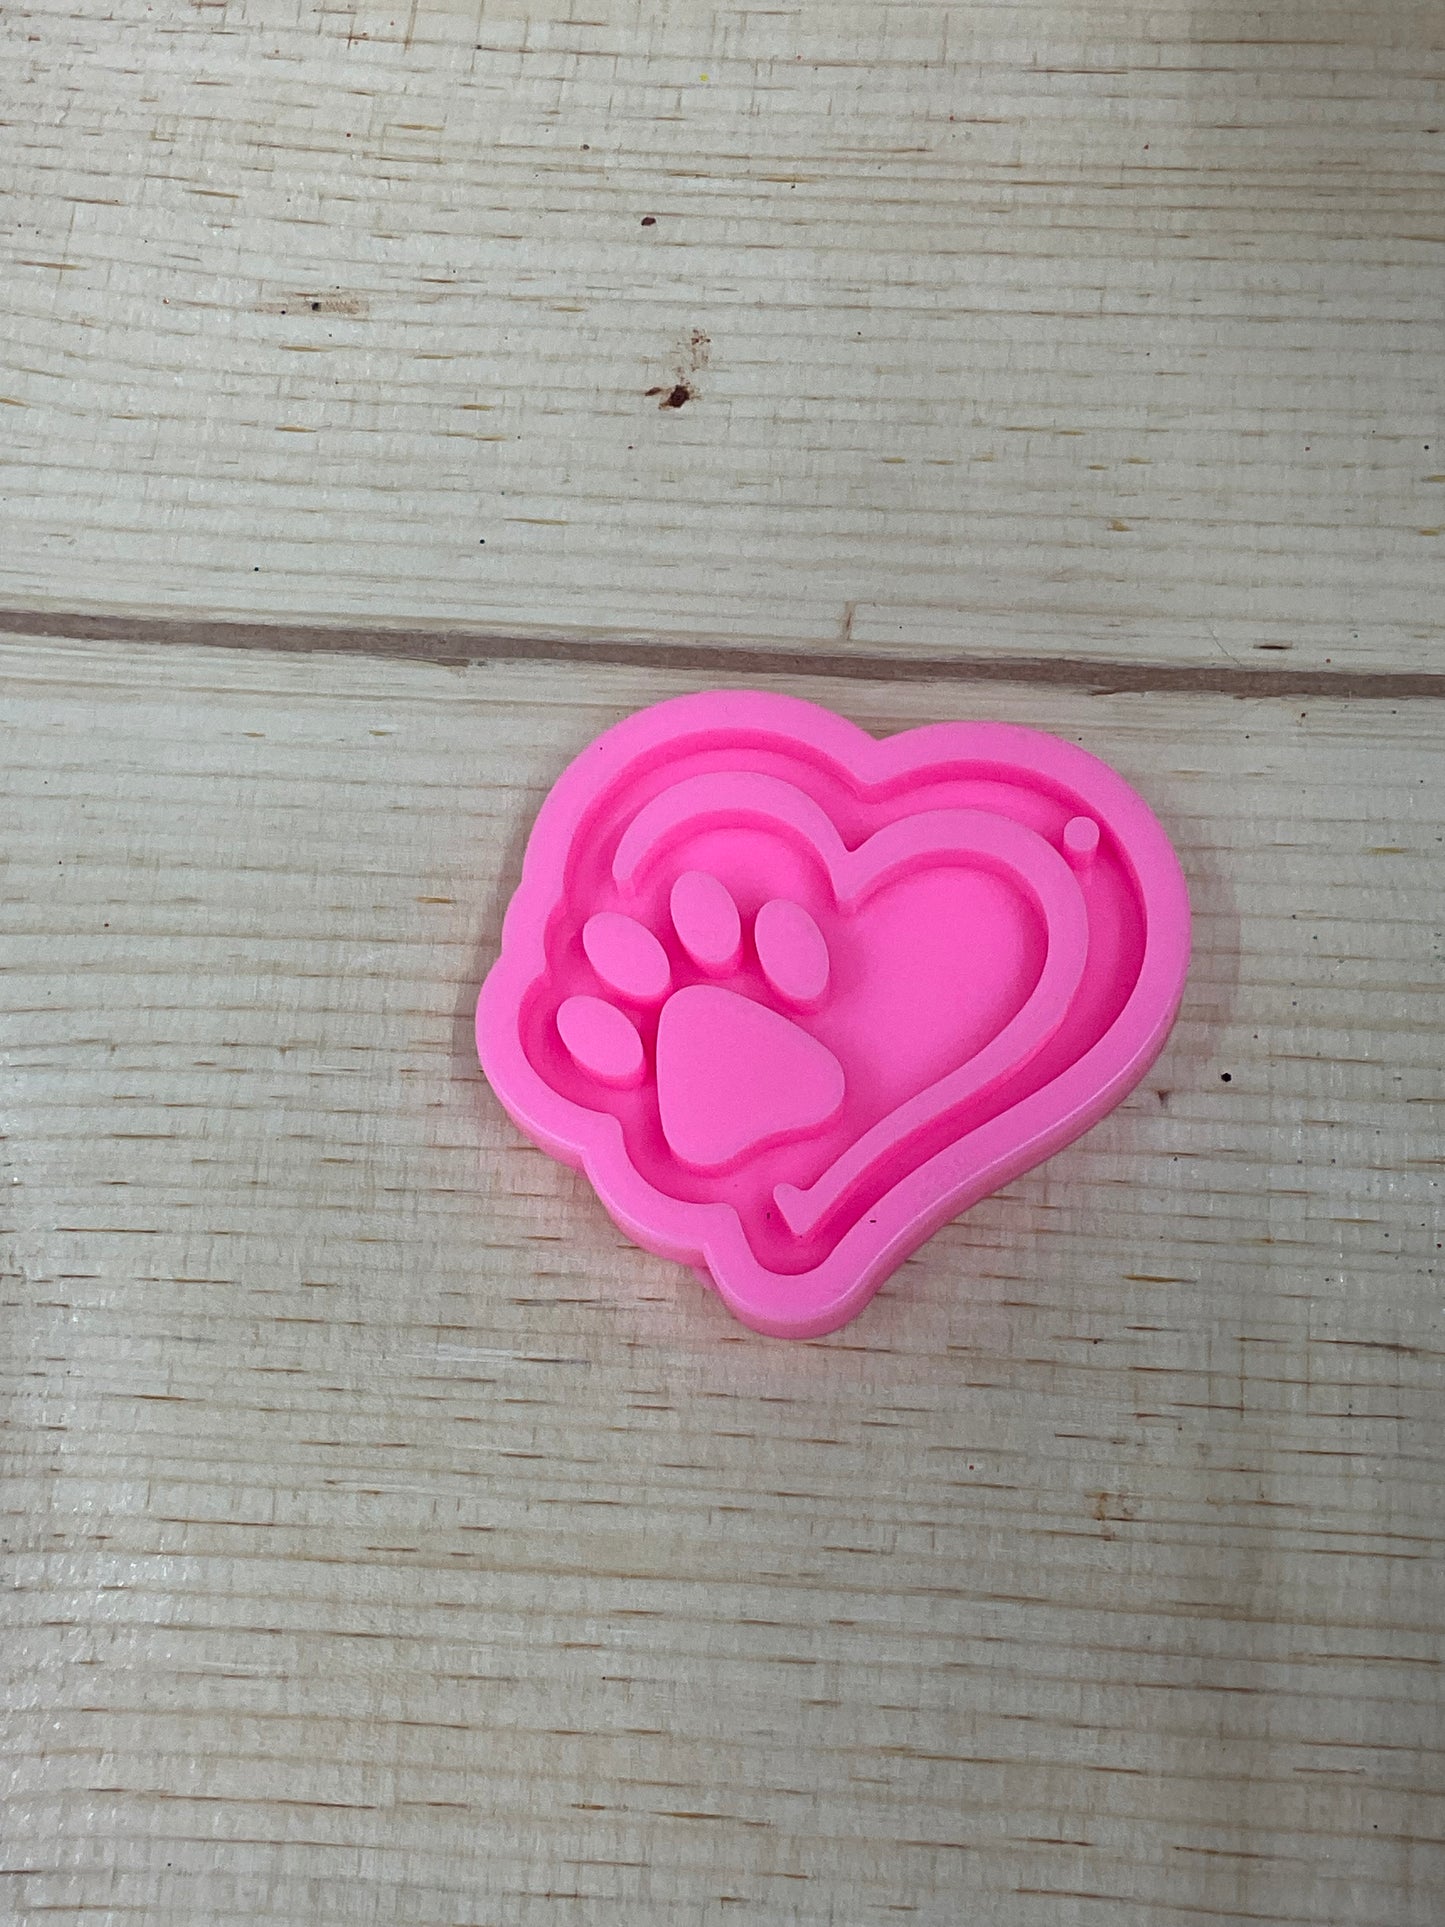 Large Paw Print Heart Keychain Mold